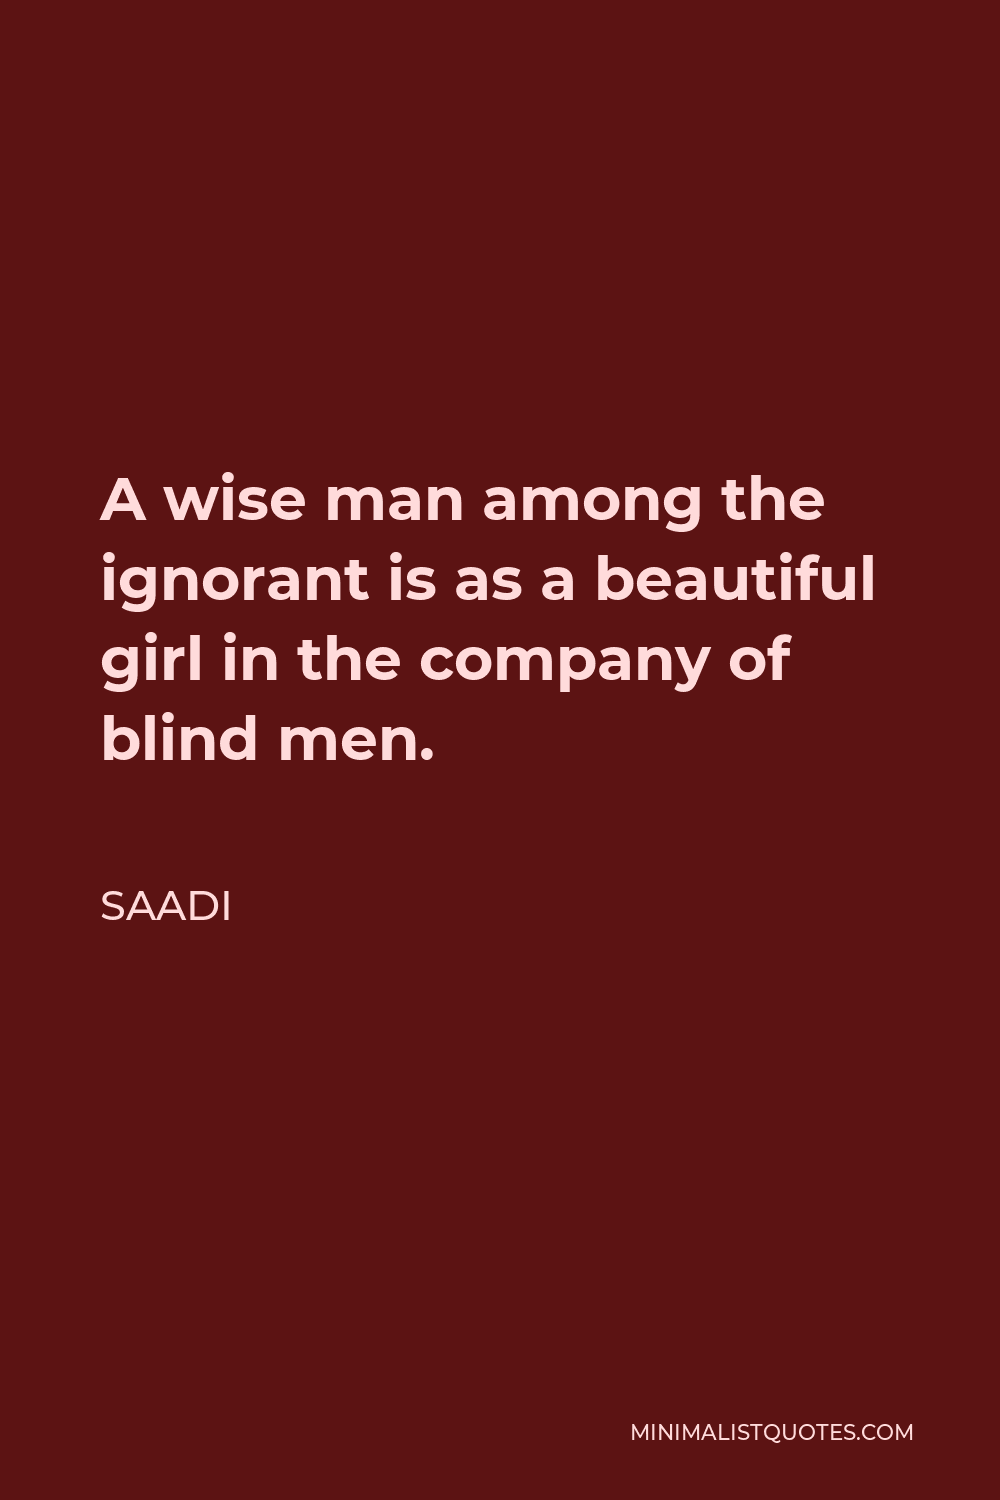 Saadi Quote - A wise man among the ignorant is as a beautiful girl in the company of blind men.